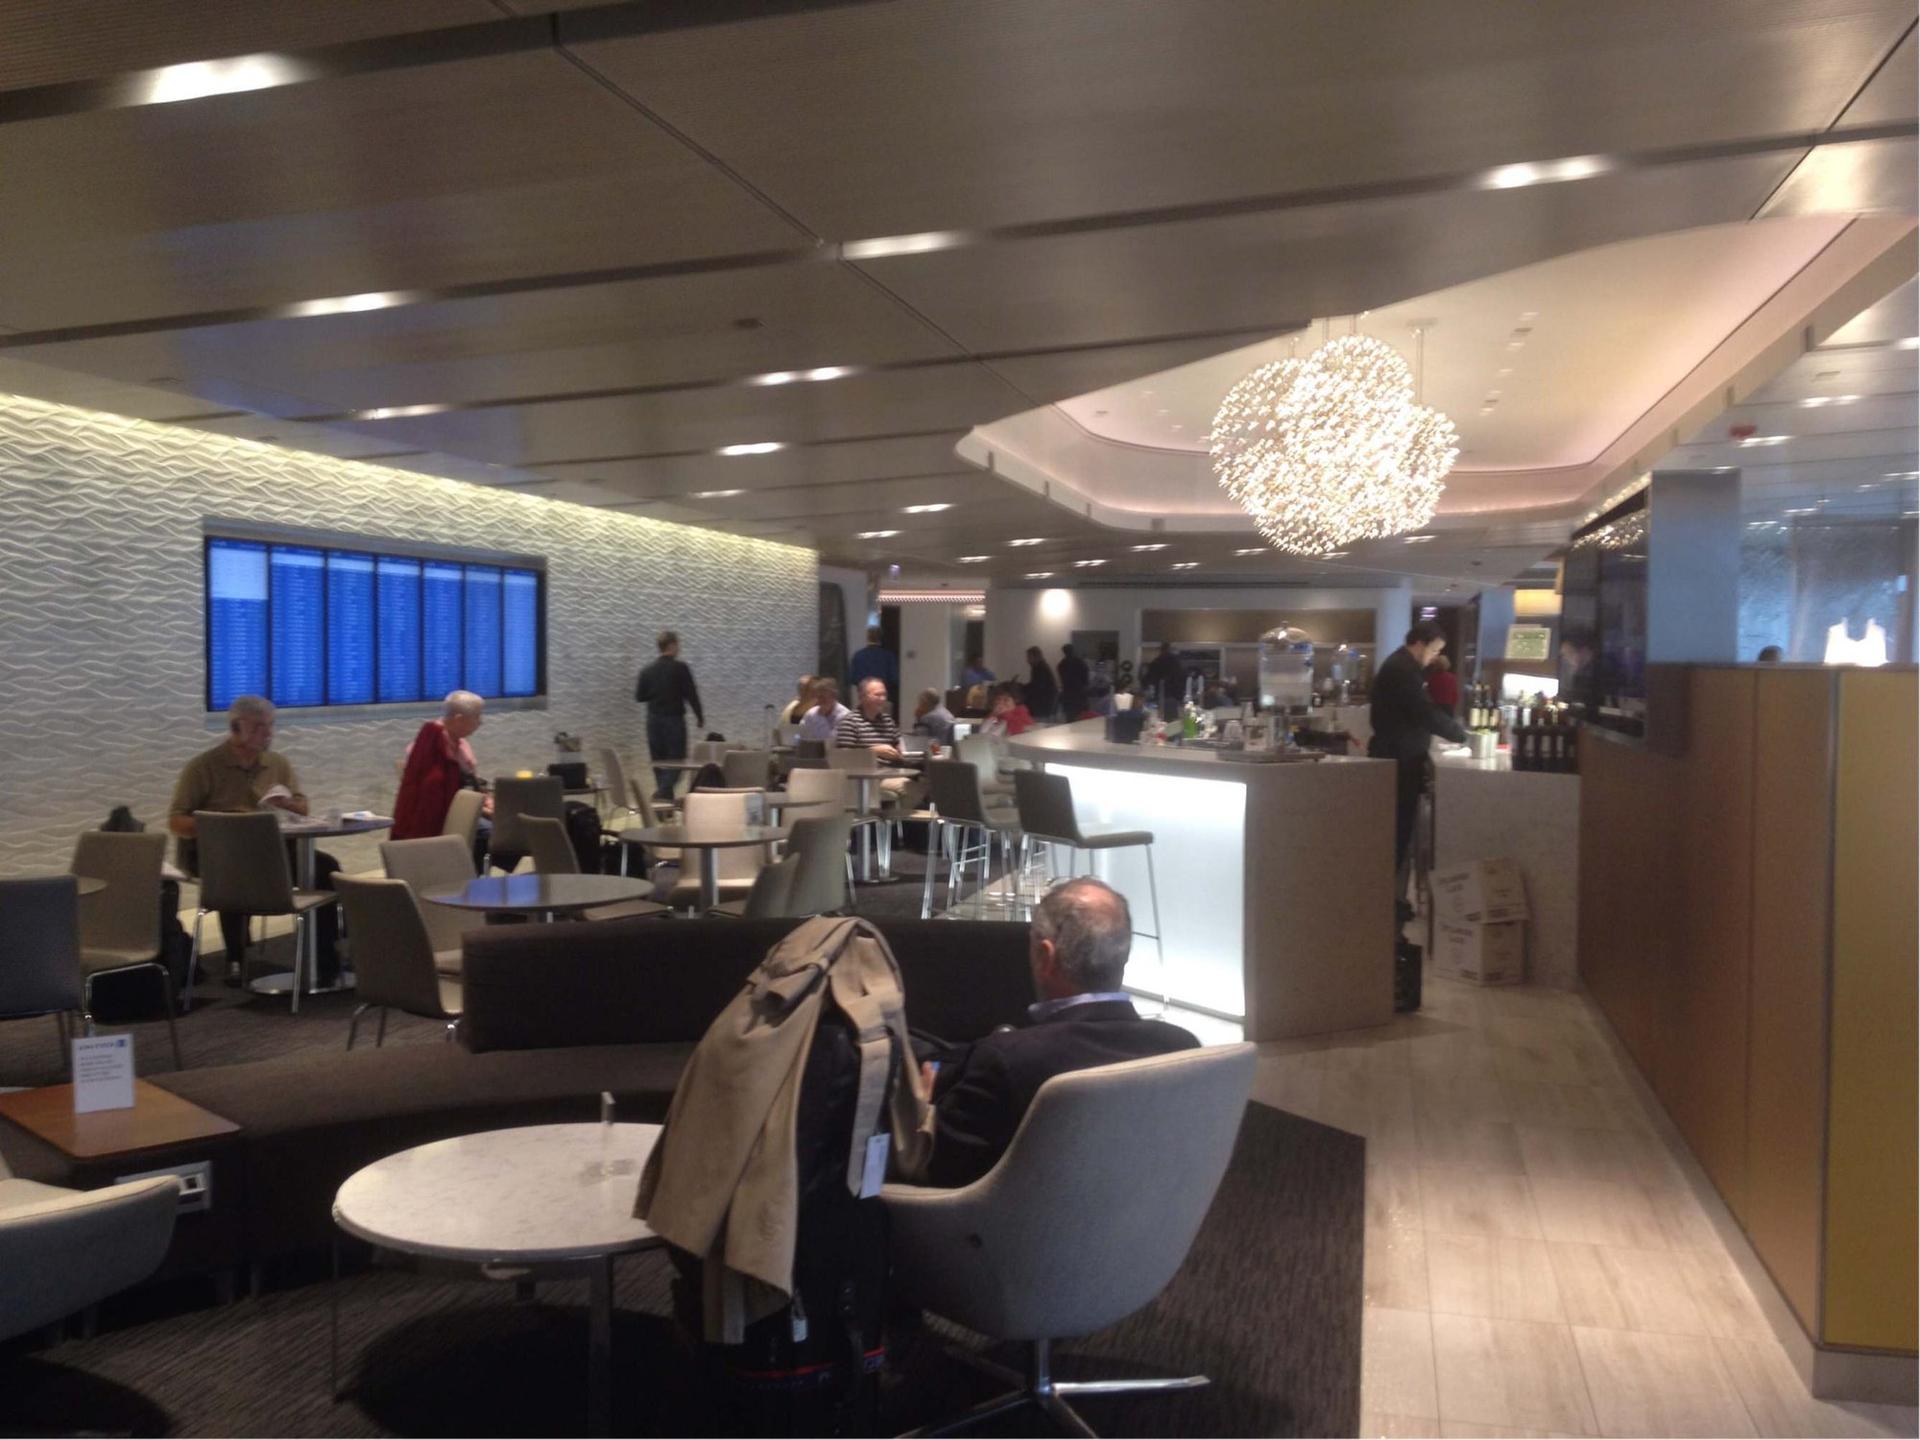 United Airlines United Club (Gate F8) image 12 of 45